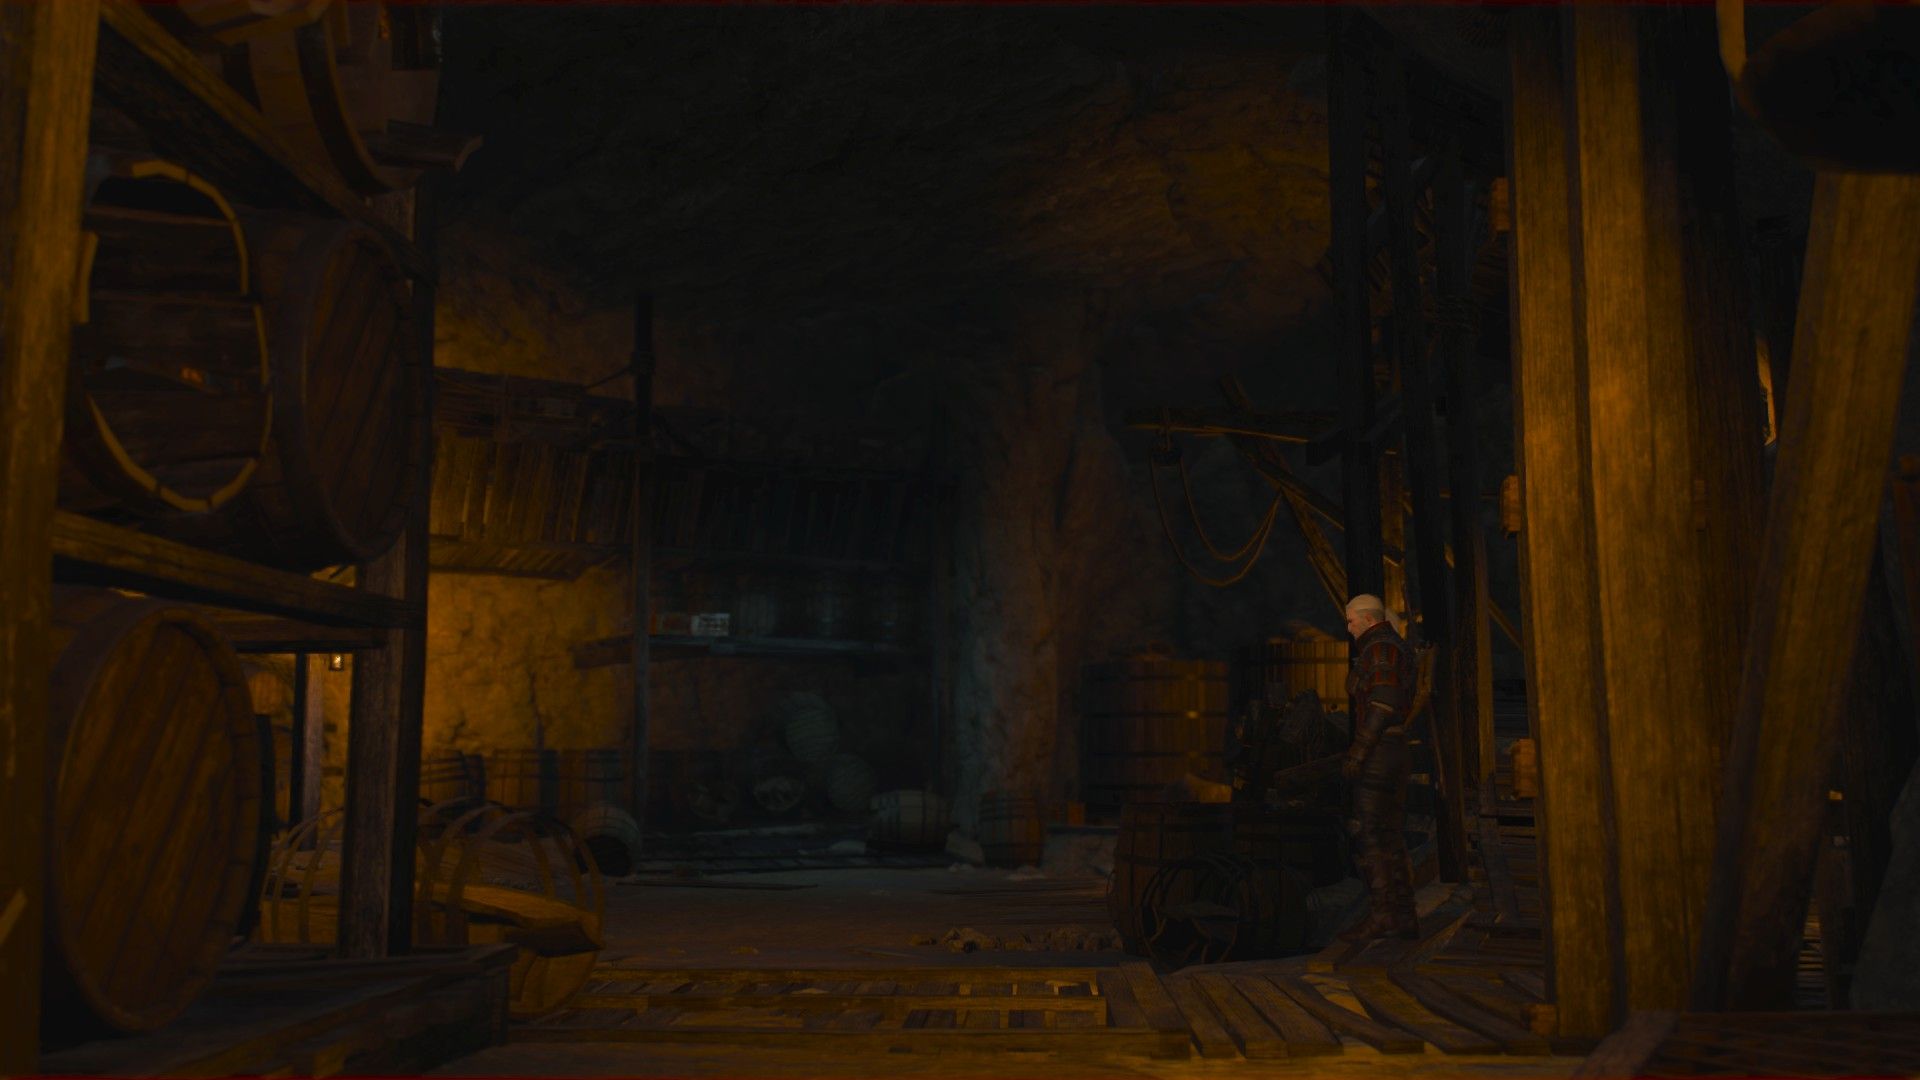 Geralt enters the wine cellar with the monster off-screen.